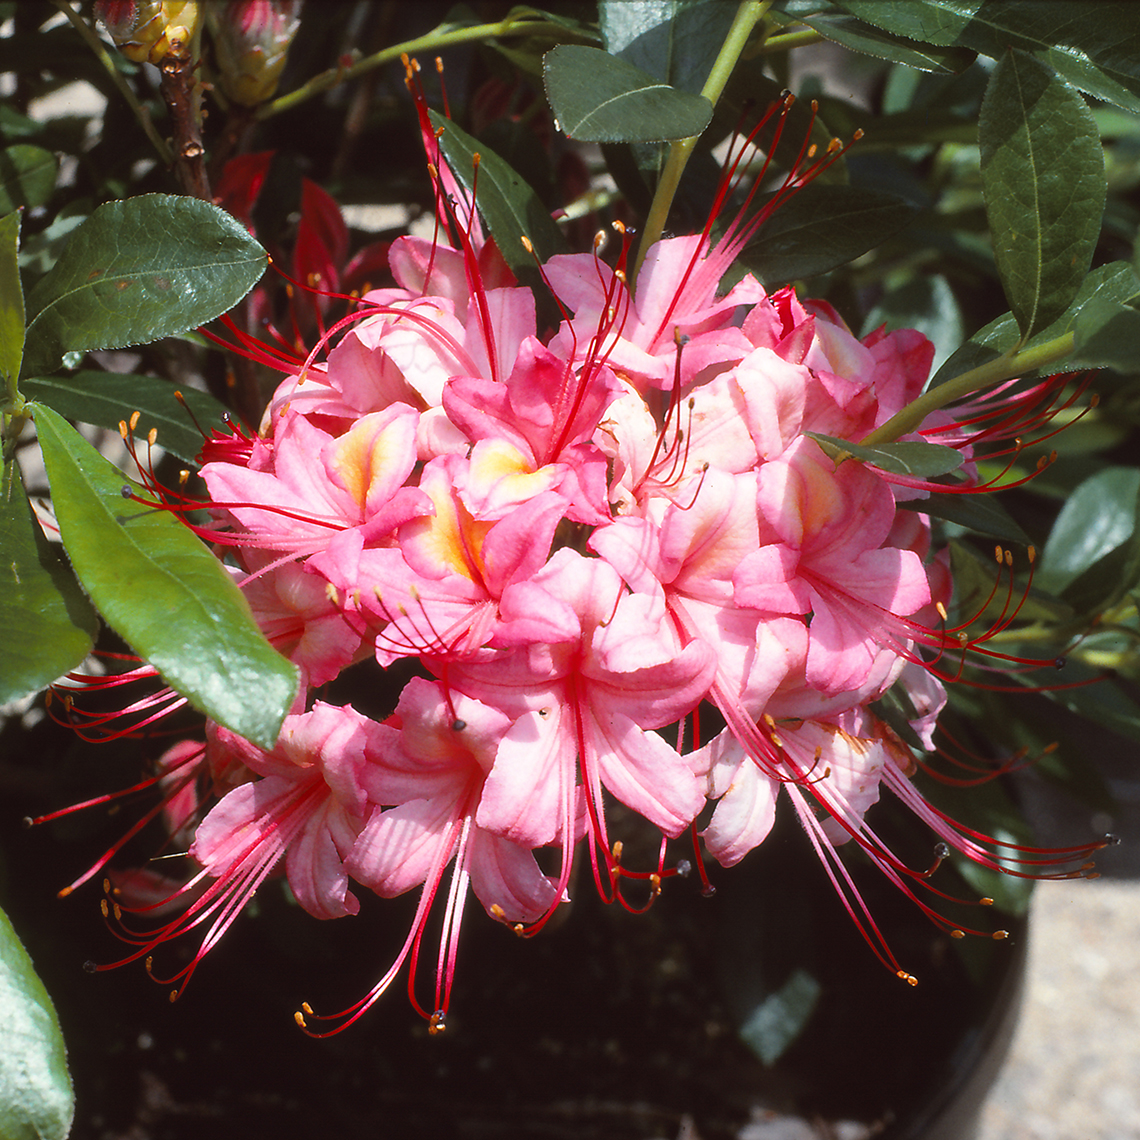 Close up of potted Weston's Pink and Sweet azalea with pink flowers accented by yellow